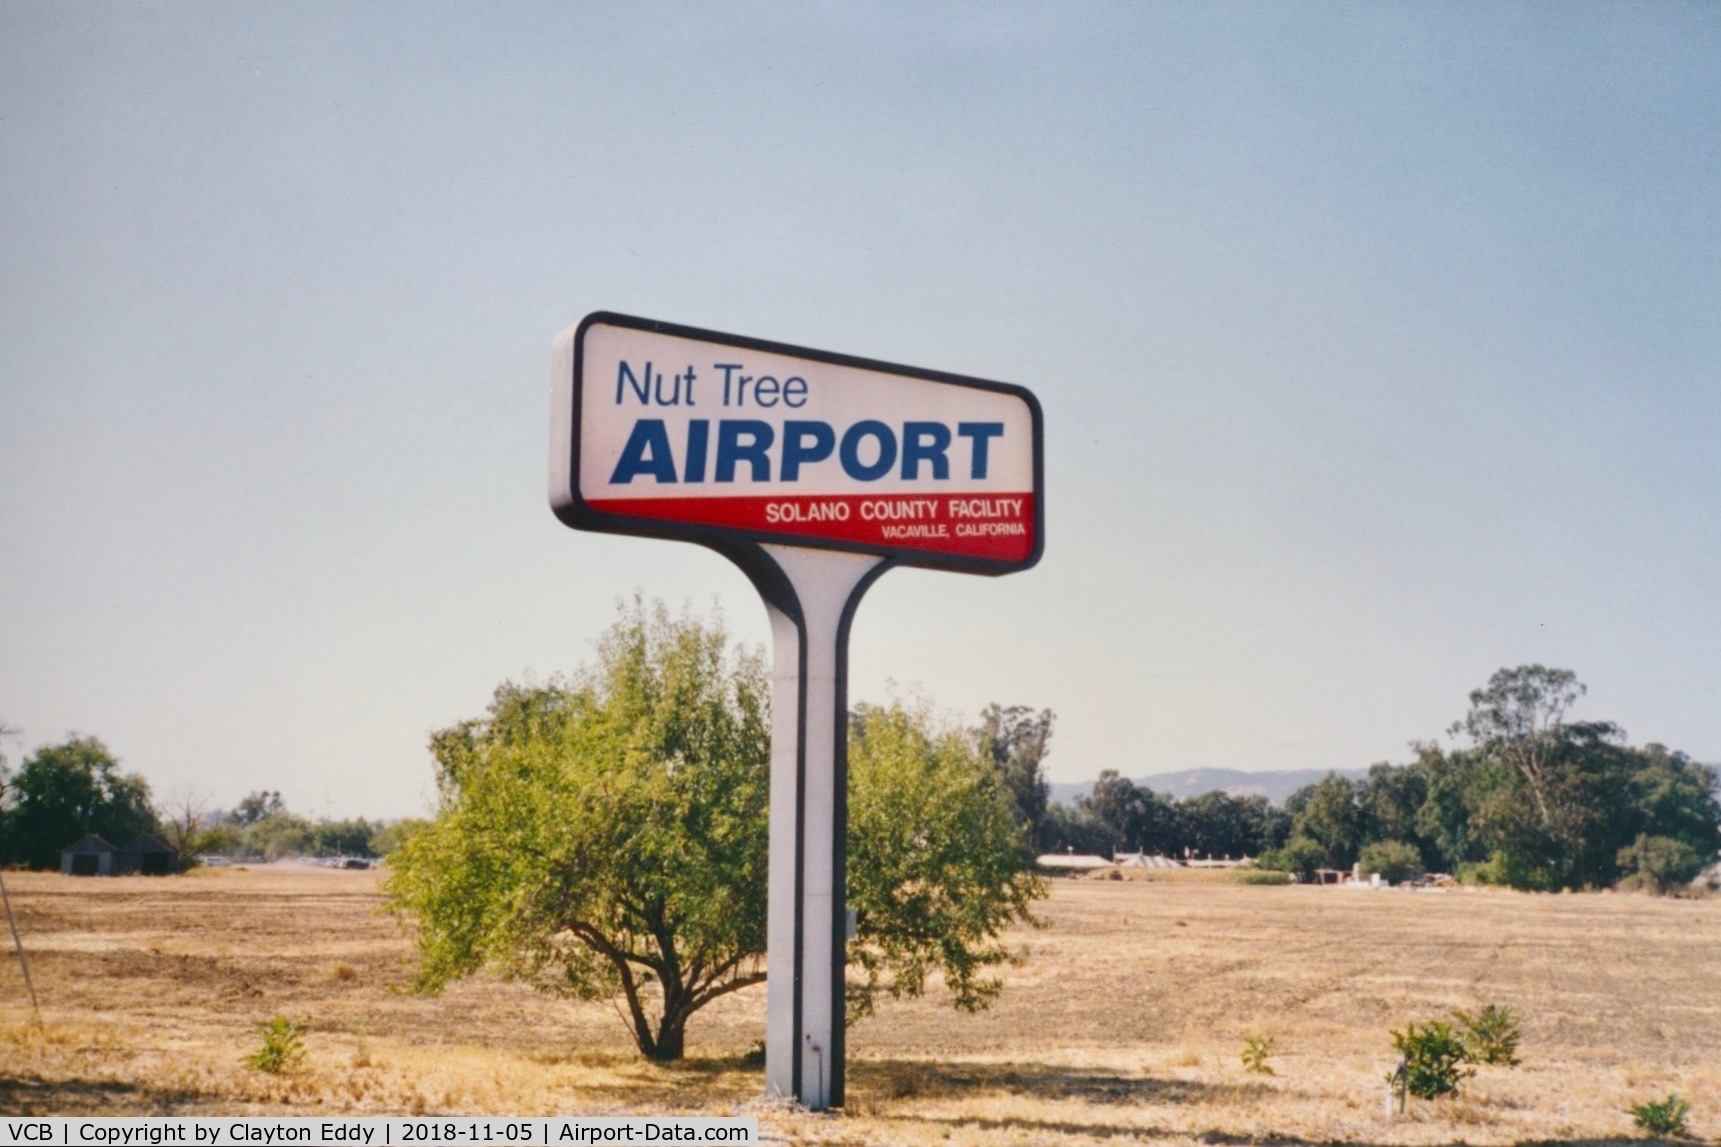 Nut Tree Airport (VCB) - Nut Tree Airport sign.